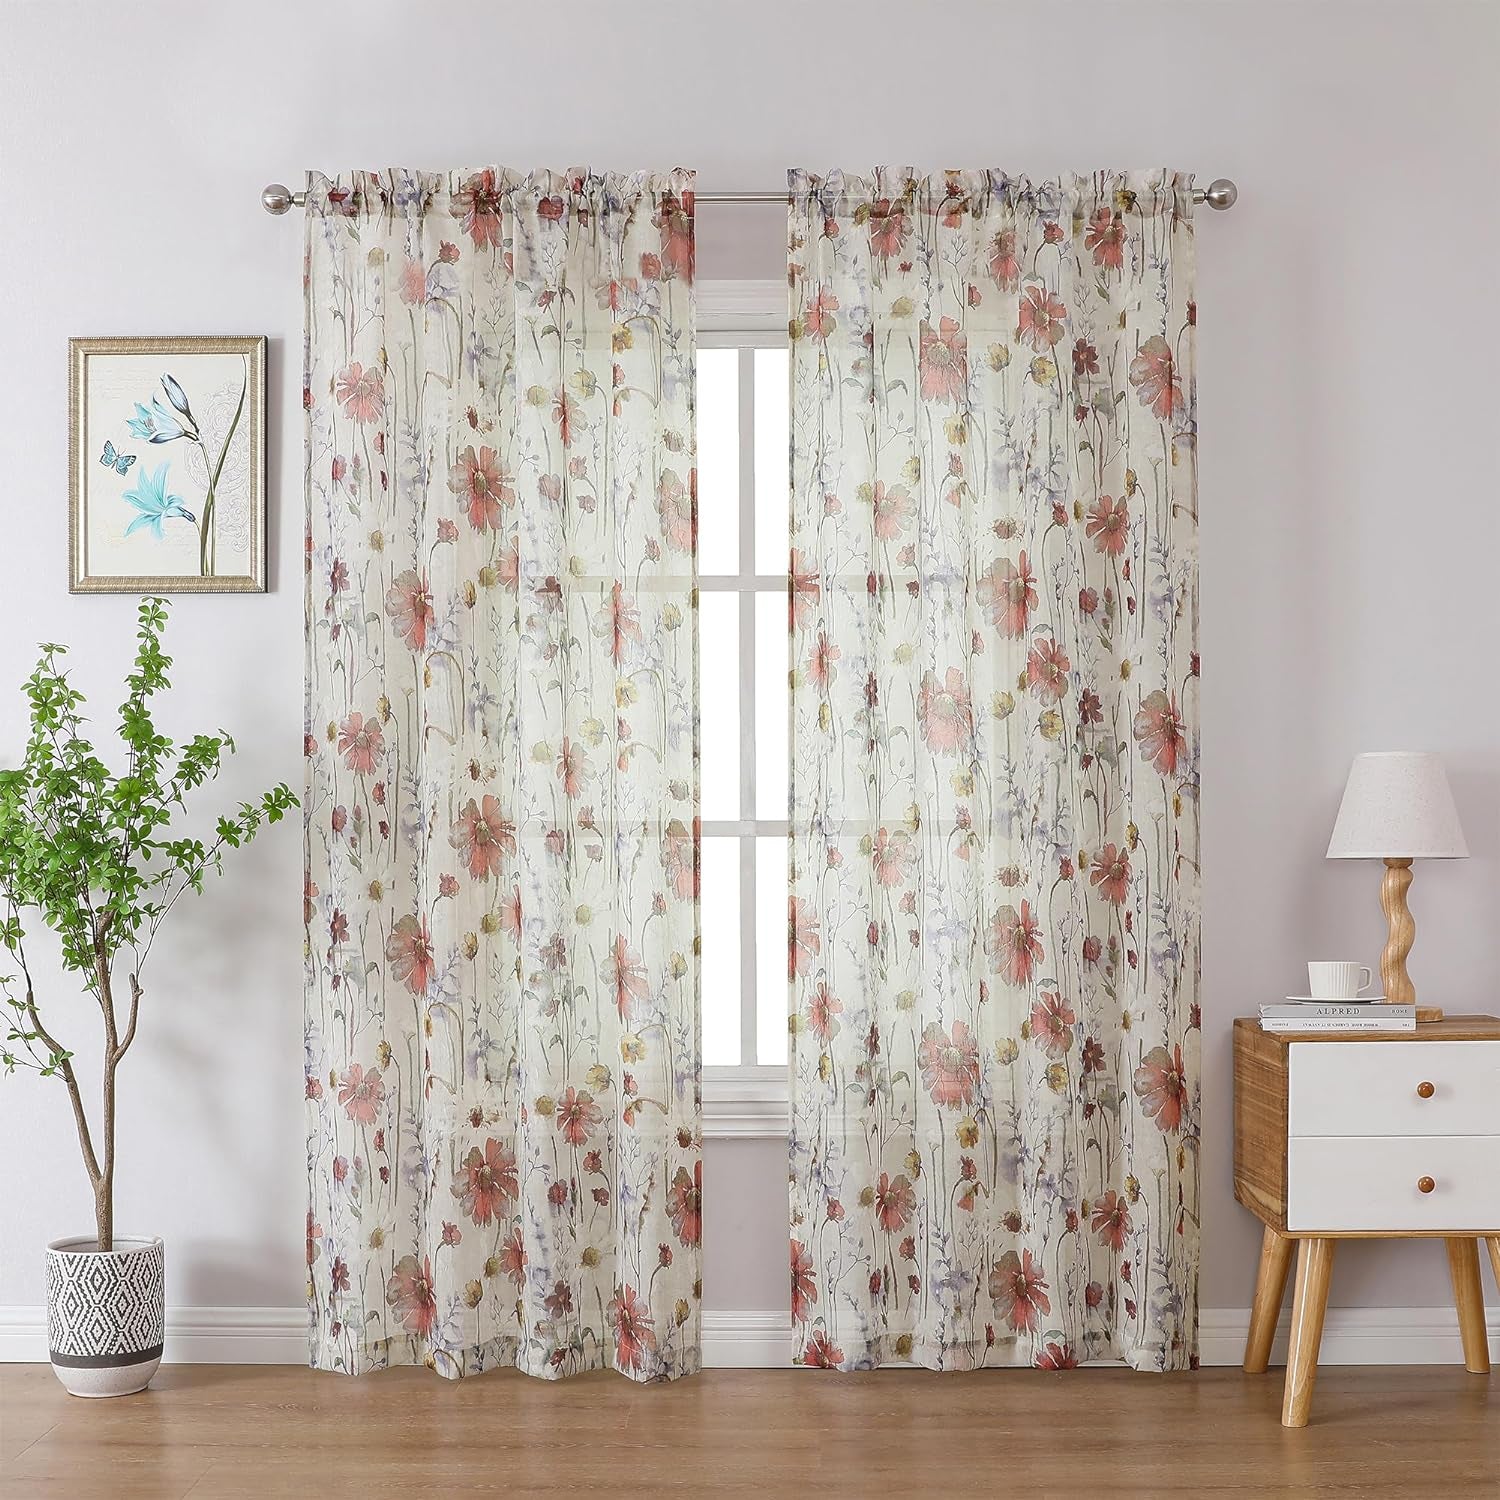 OWENIE Crushed Semi Sheer Curtains 72 Inches Length 2 Panels, Floral Pattern Design Rod Pocket Light Filtering Farmhouse Curtains for Bedroom Living Room, 2 Pieces Total 84 Inch Wide, 72 Inch Long  OWENIE   